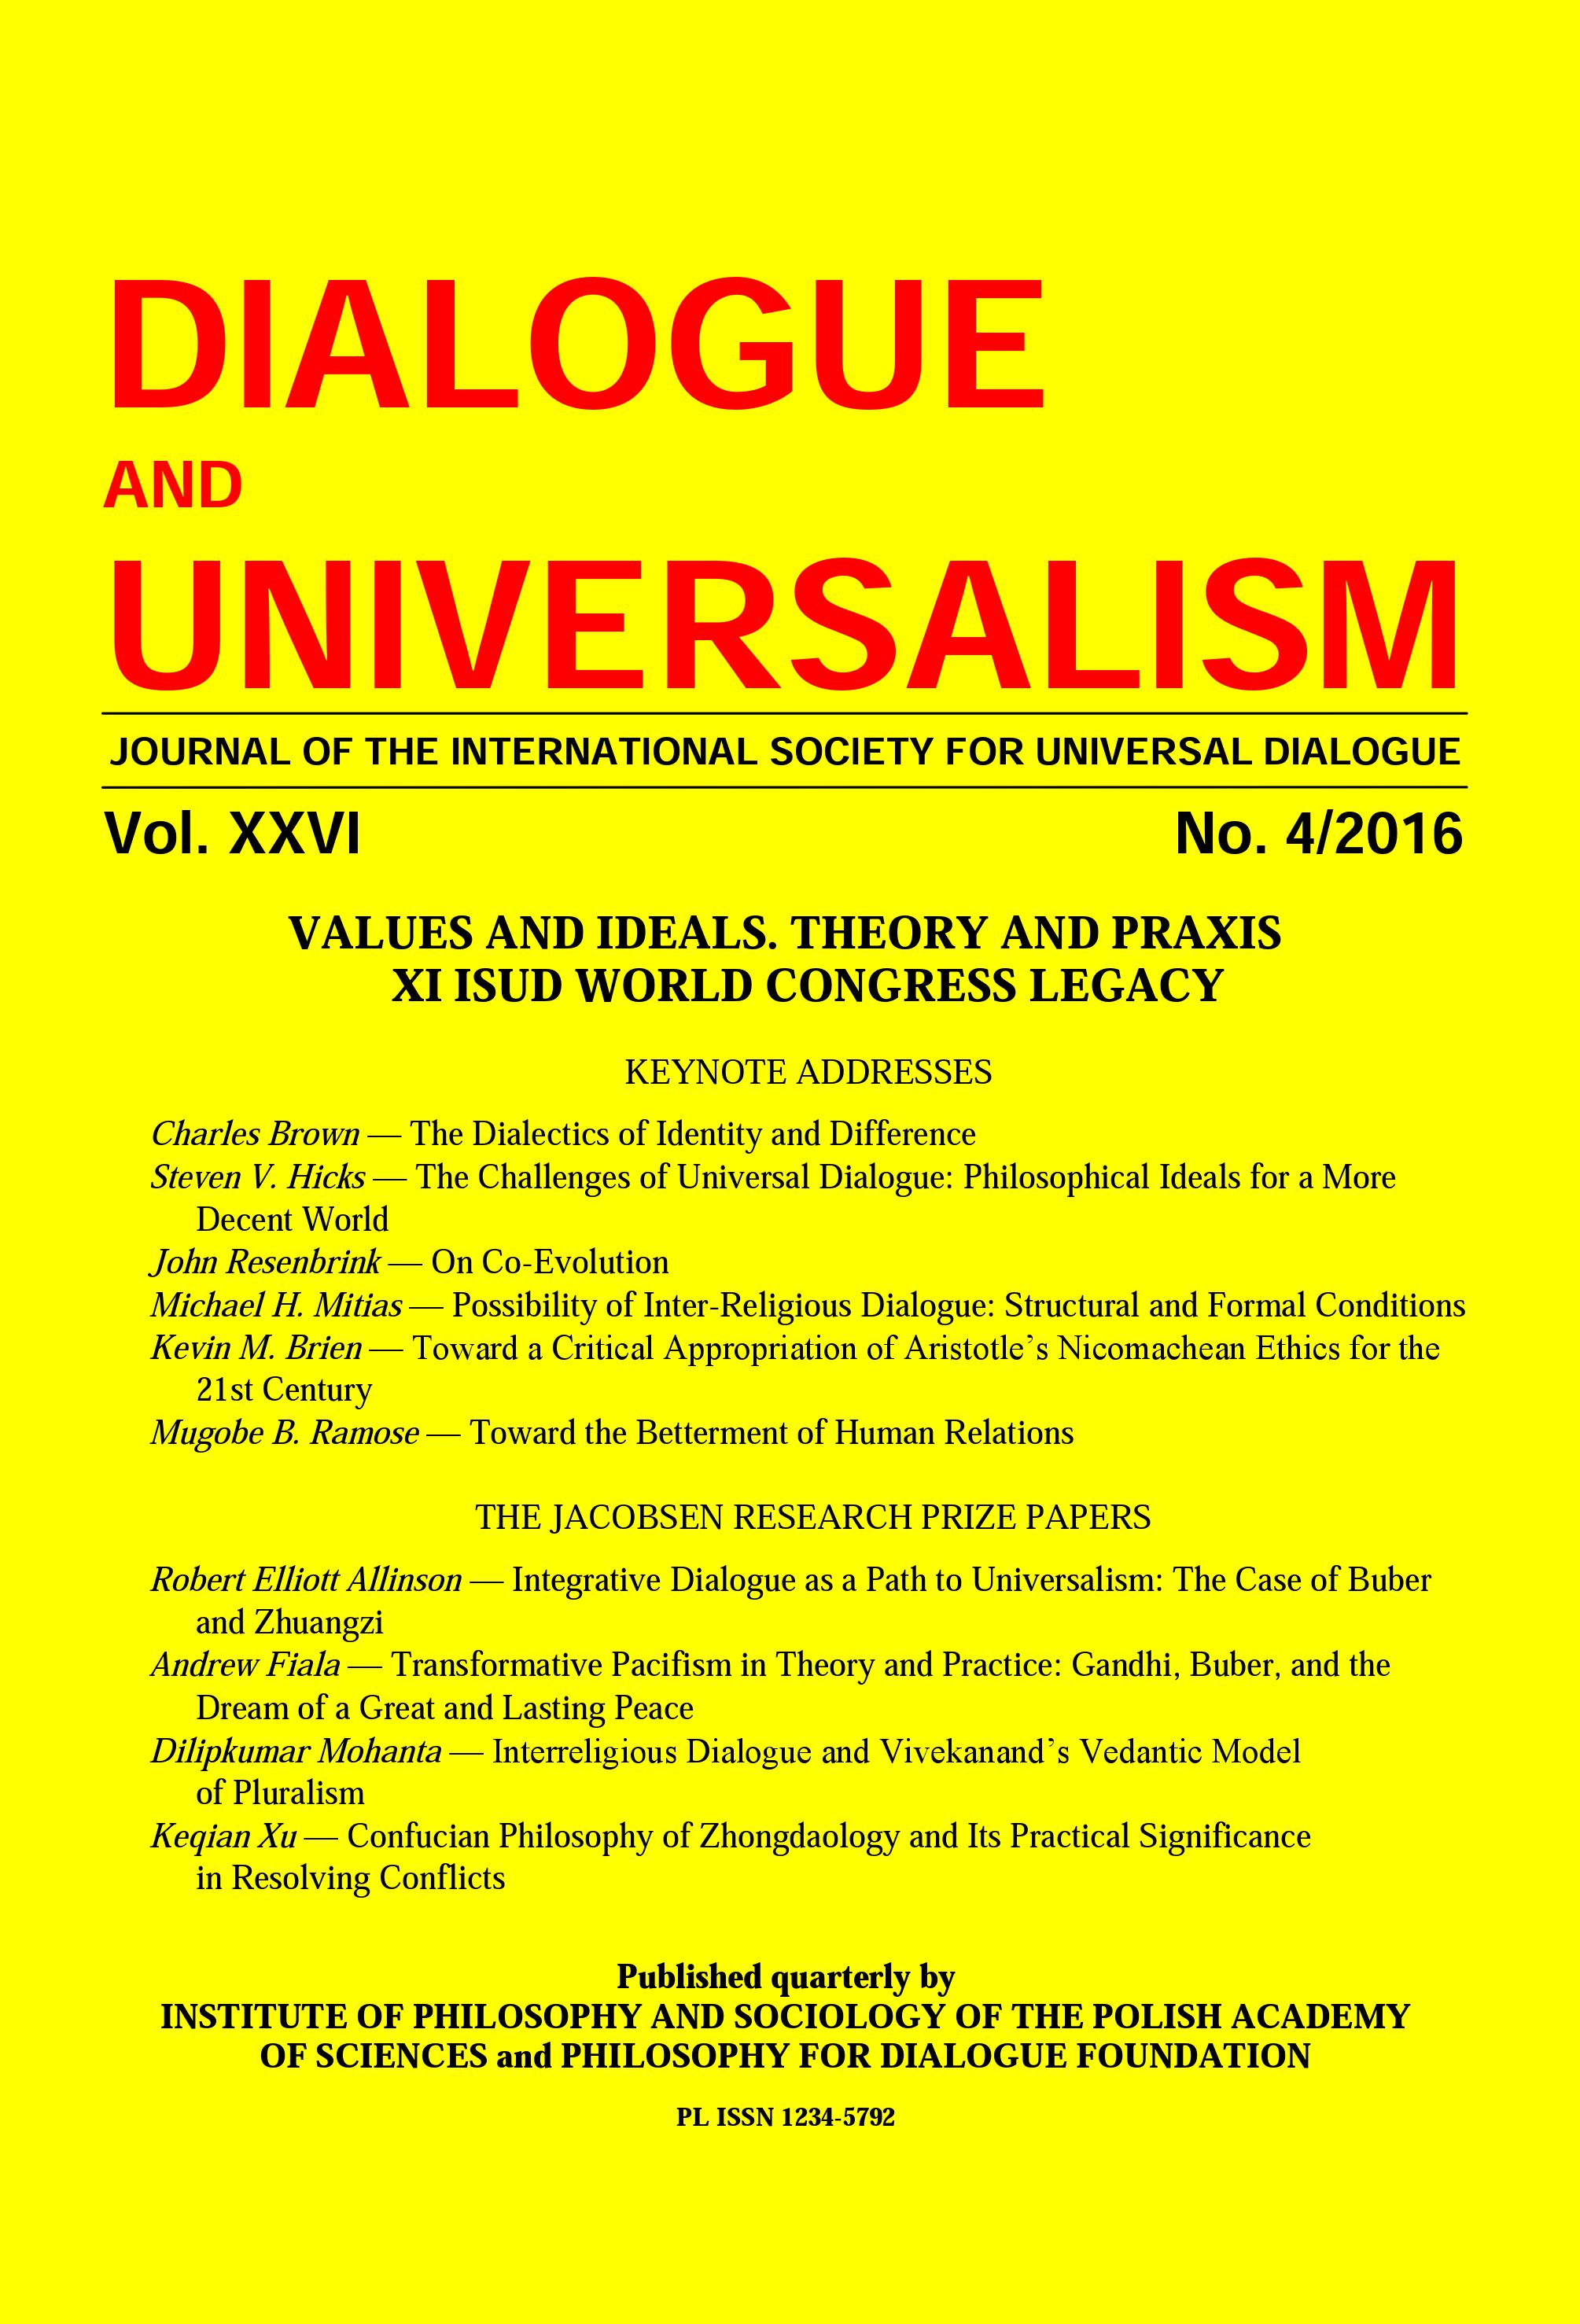 THE VALUE OF CONVERSATIONAL THINKING IN BUILDING A DECENT WORLD: THE PERSPECTIVE OF POST-COLONIAL SUB-SAHARAN AFRICA Cover Image